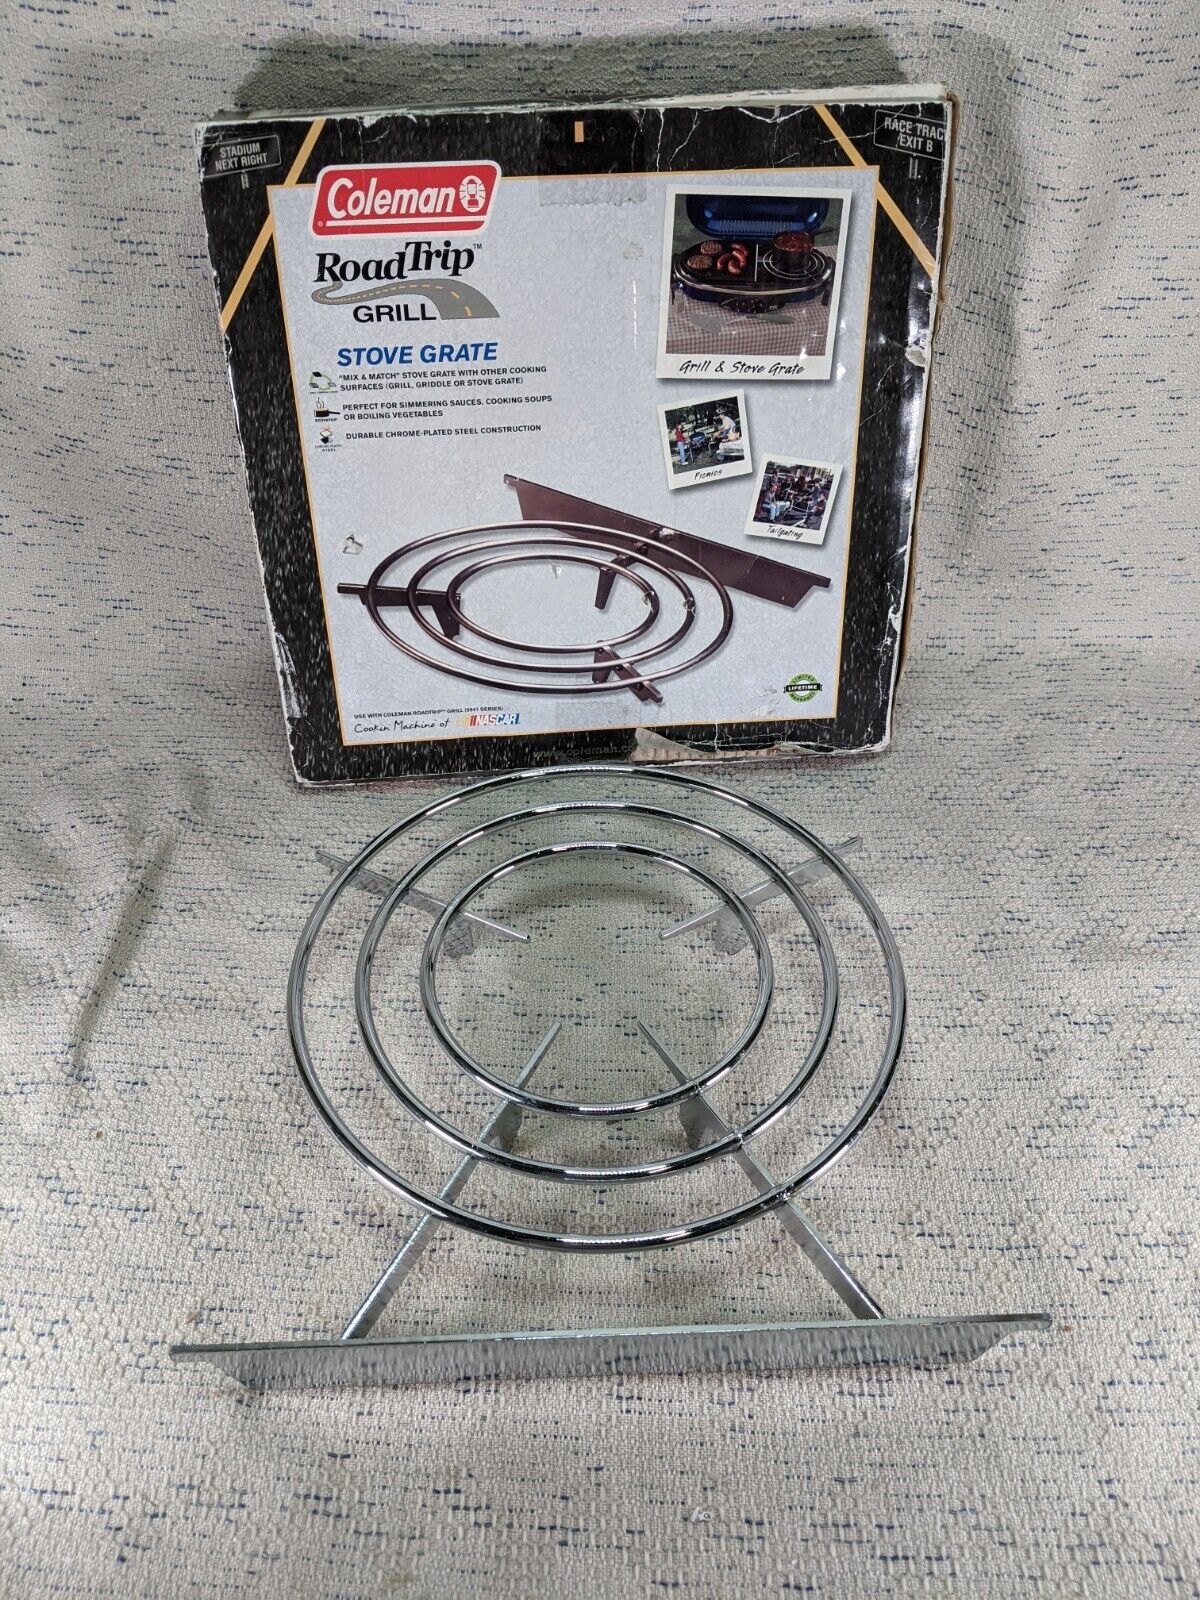 Coleman Roadtrip Grill Stove Grate Use With Coleman Roadtrip Grill 9941 Series